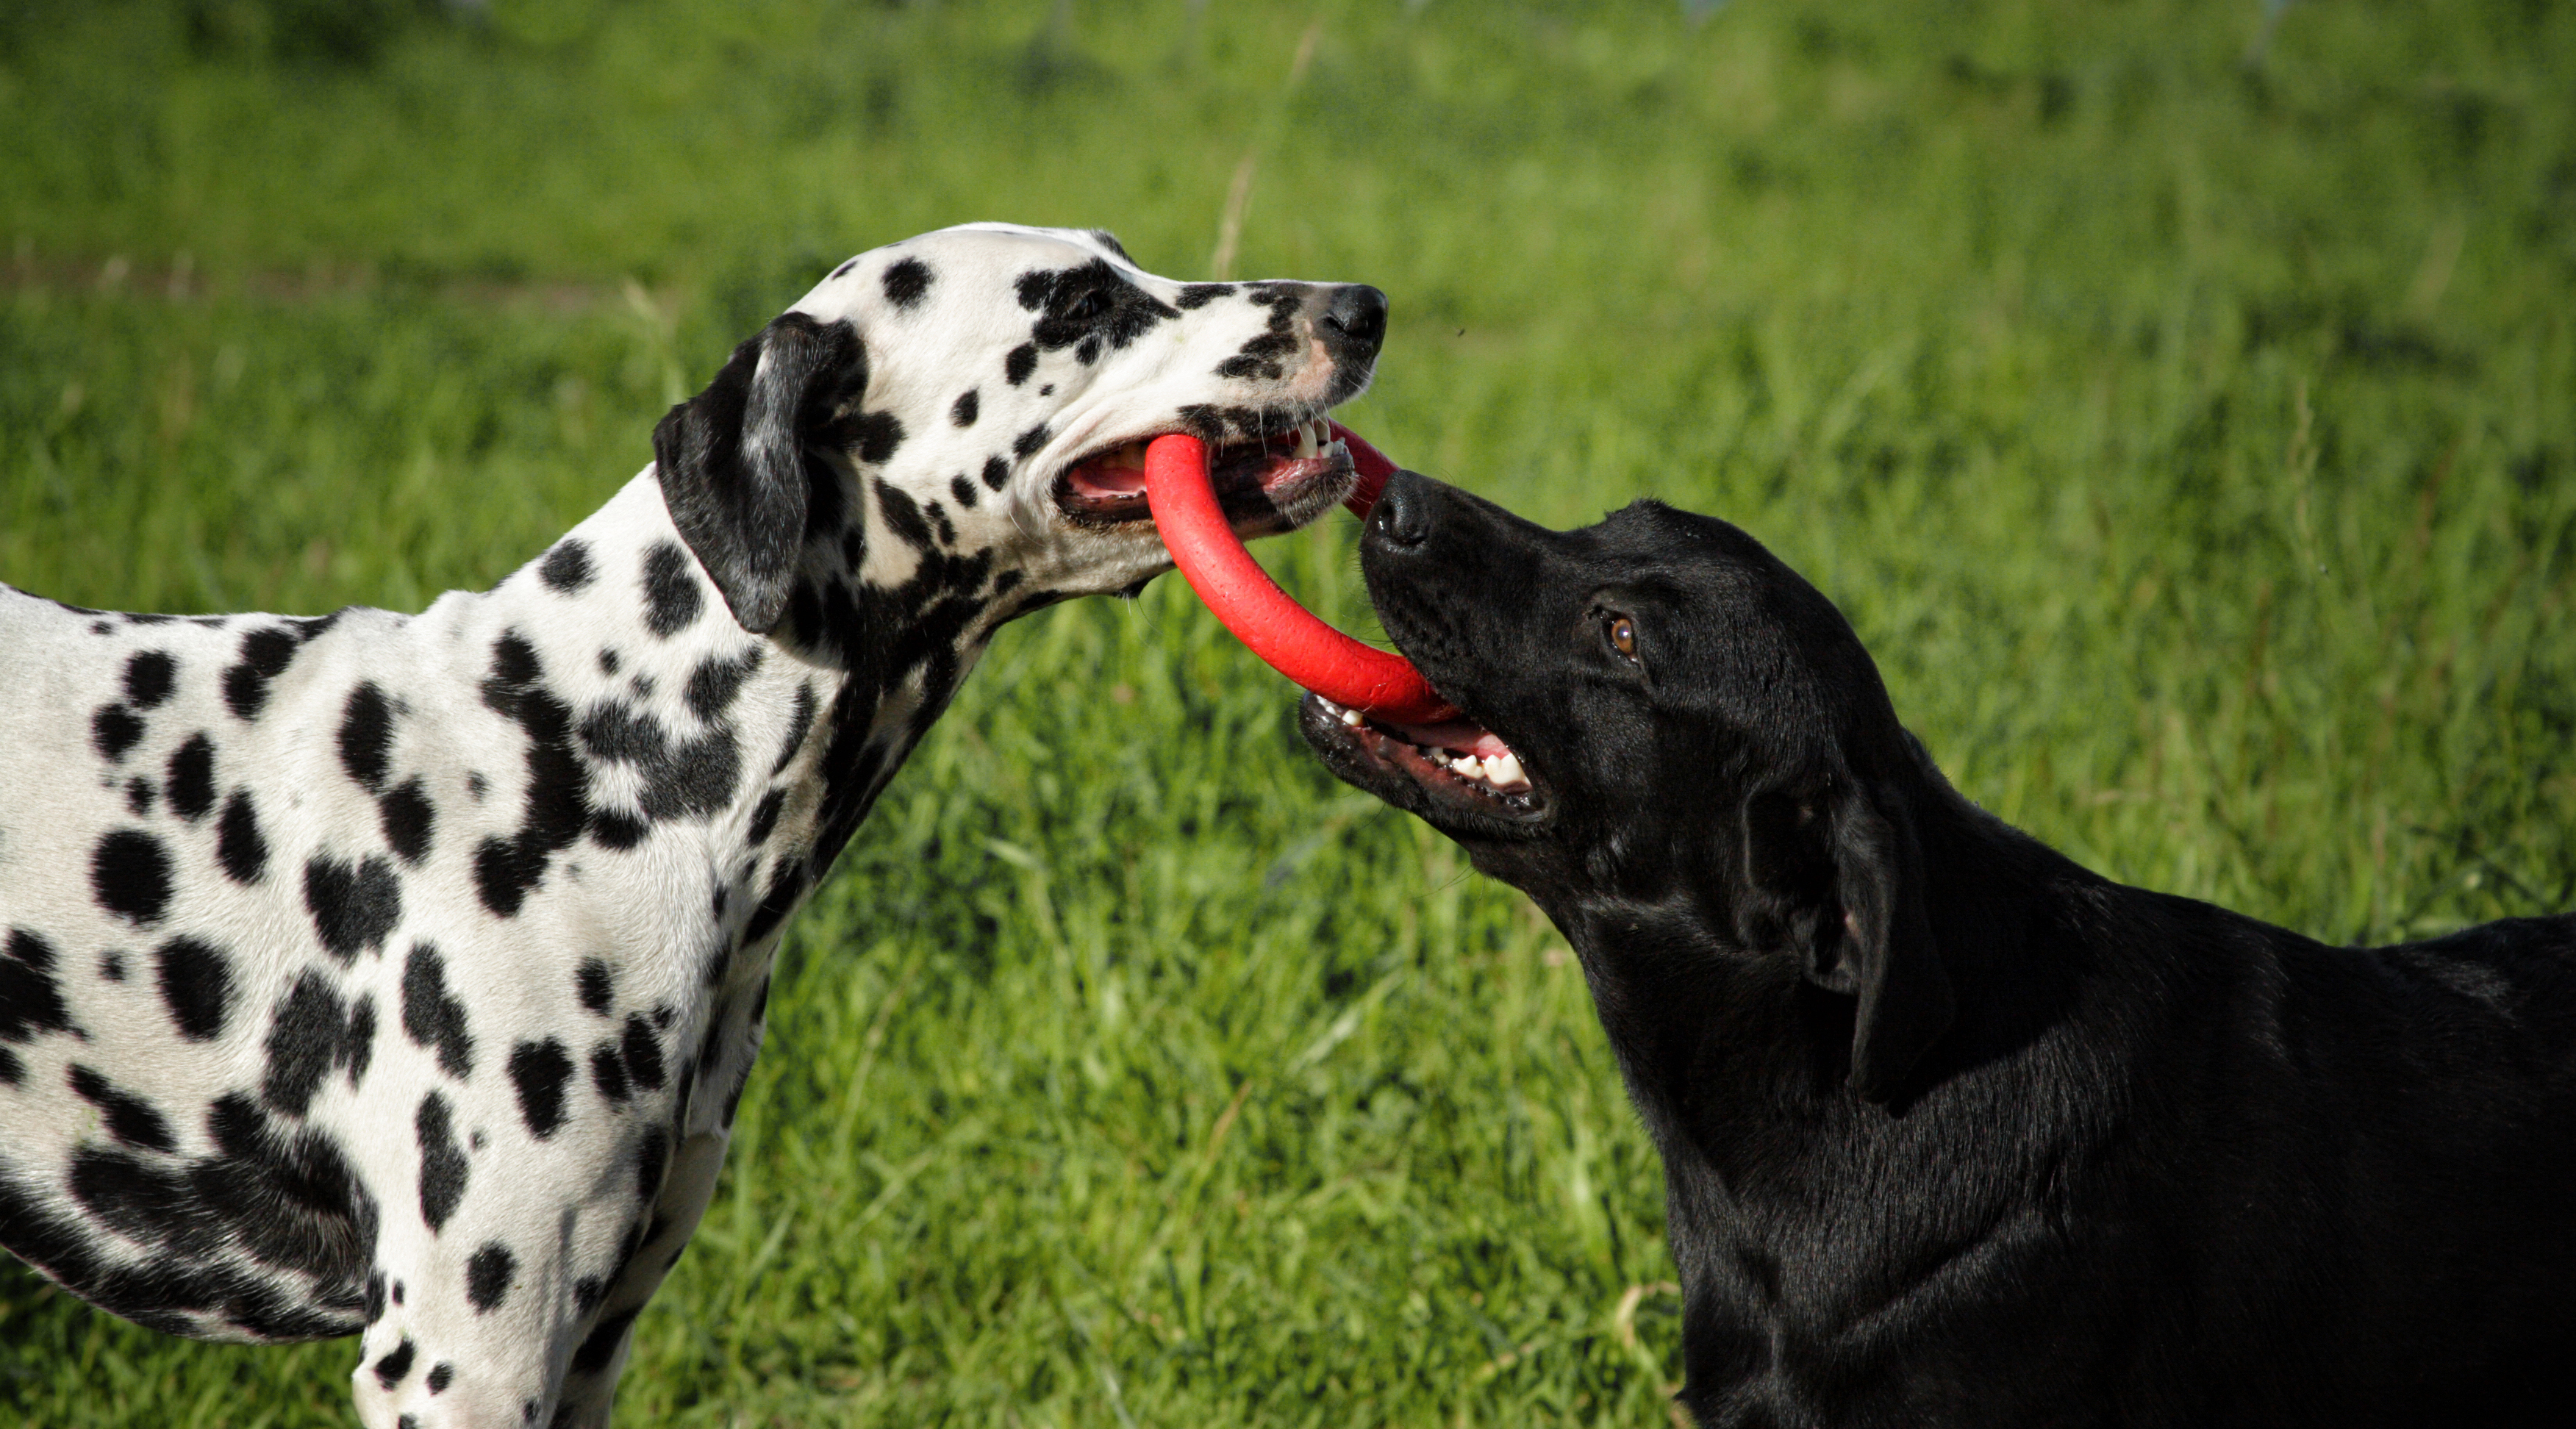 do dalmatians get along with other dogs?